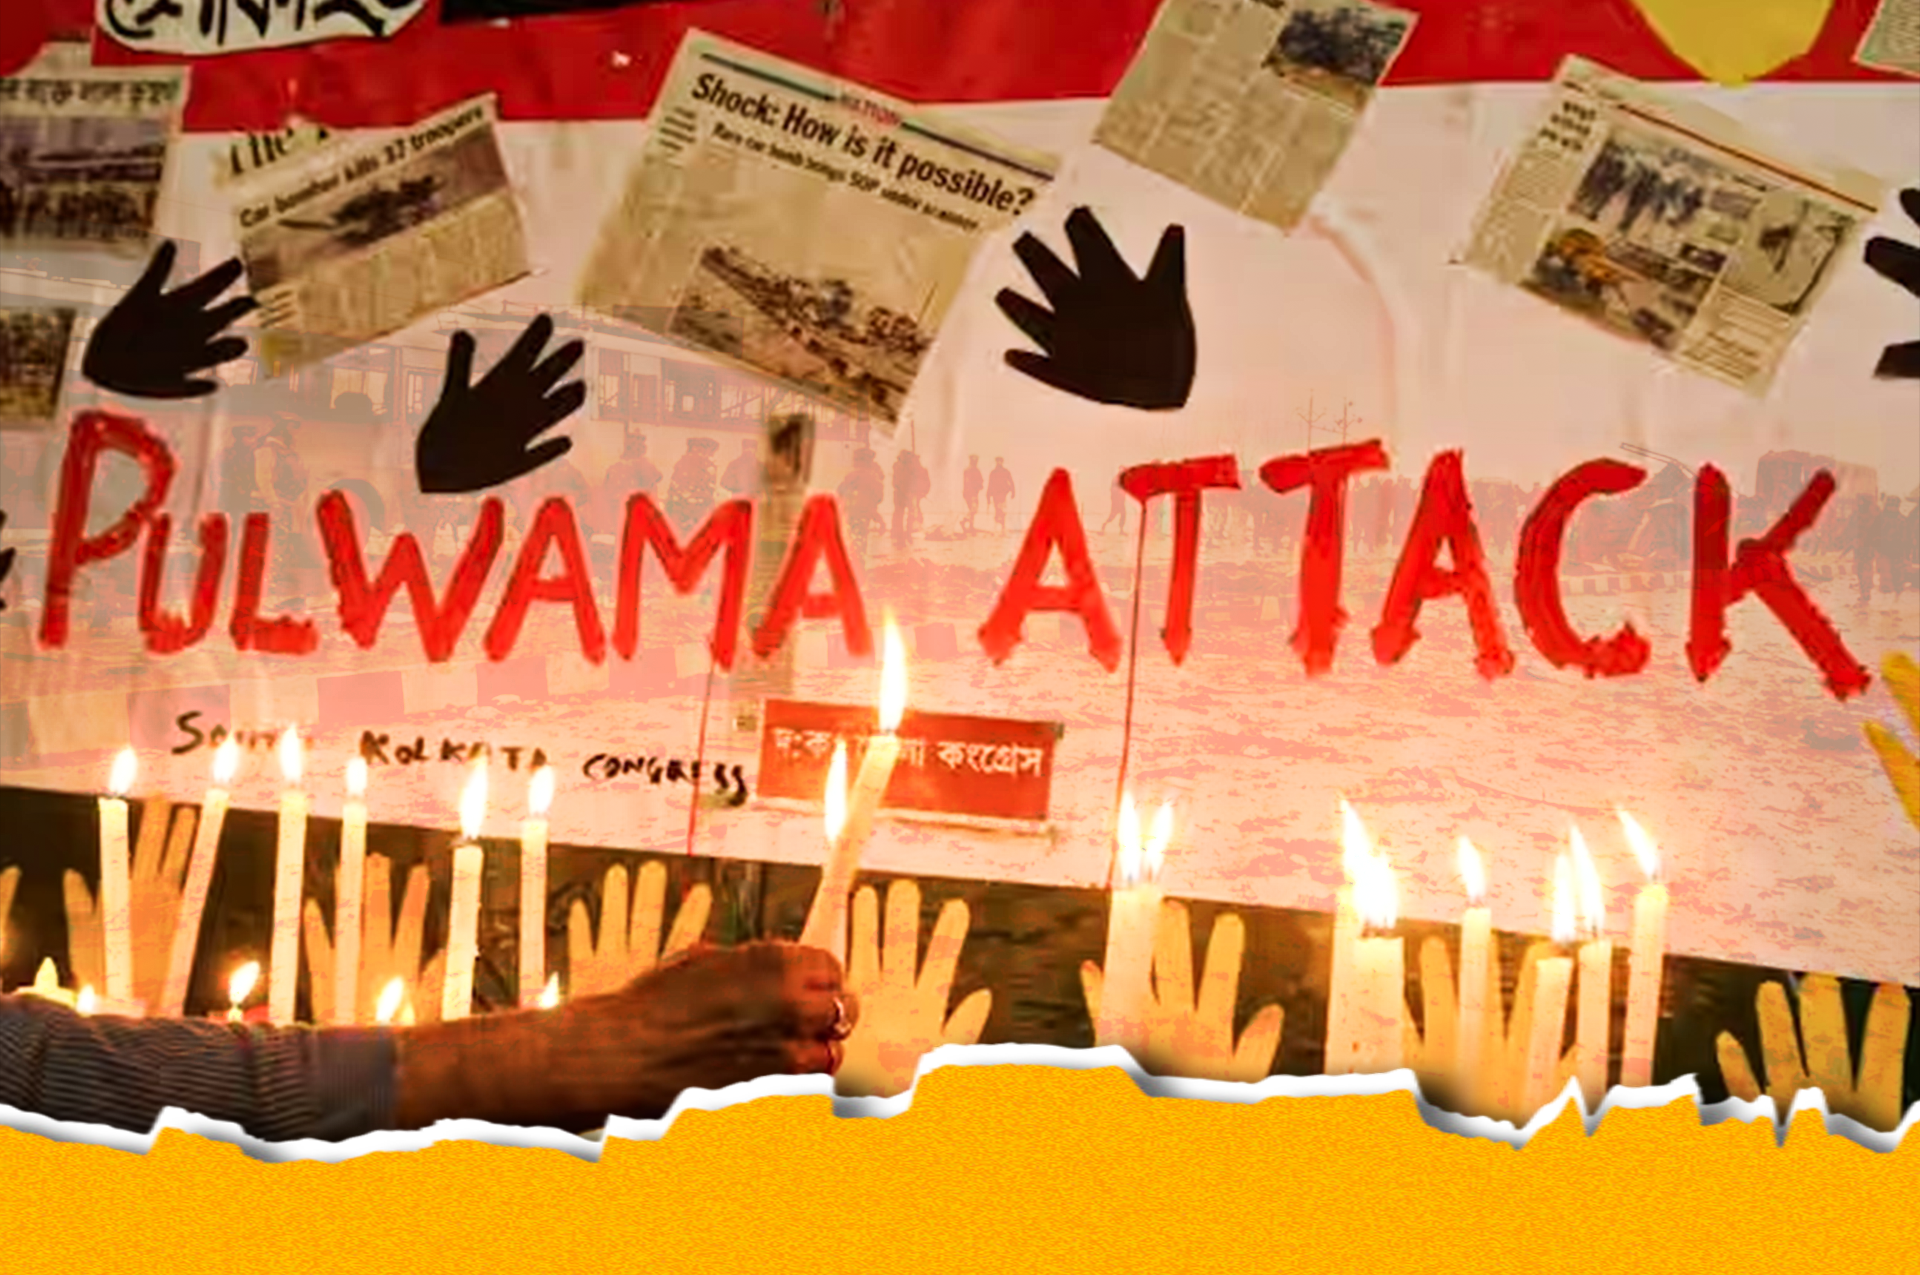 The Worst Terror Attack “Pulwama Attack” 